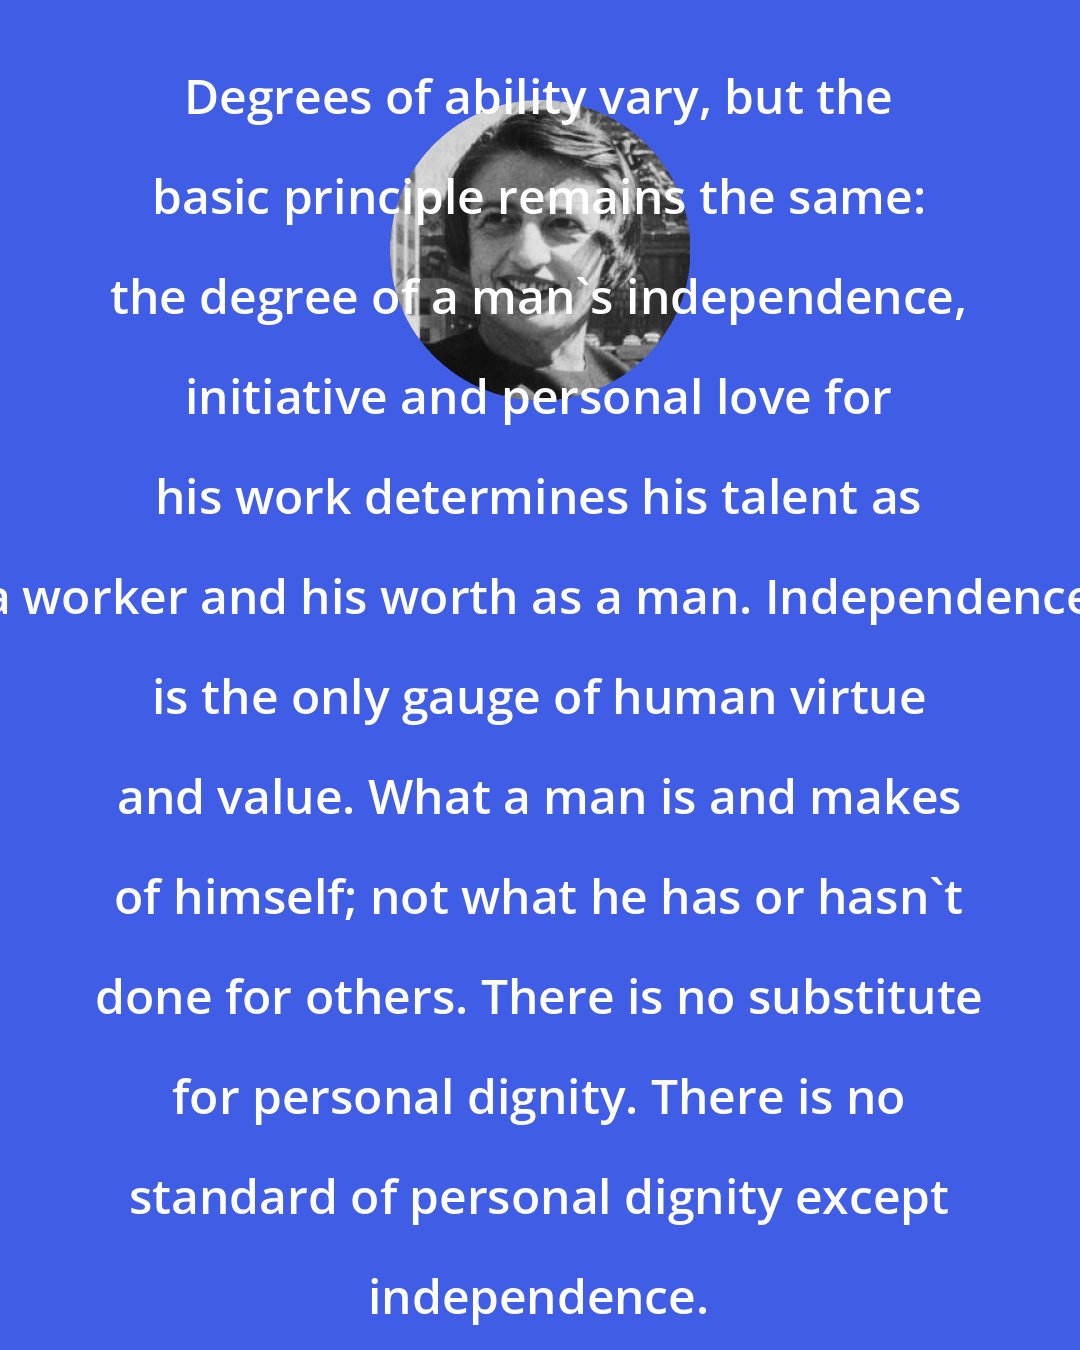 Ayn Rand: Degrees of ability vary, but the basic principle remains the same: the degree of a man's independence, initiative and personal love for his work determines his talent as a worker and his worth as a man. Independence is the only gauge of human virtue and value. What a man is and makes of himself; not what he has or hasn't done for others. There is no substitute for personal dignity. There is no standard of personal dignity except independence.